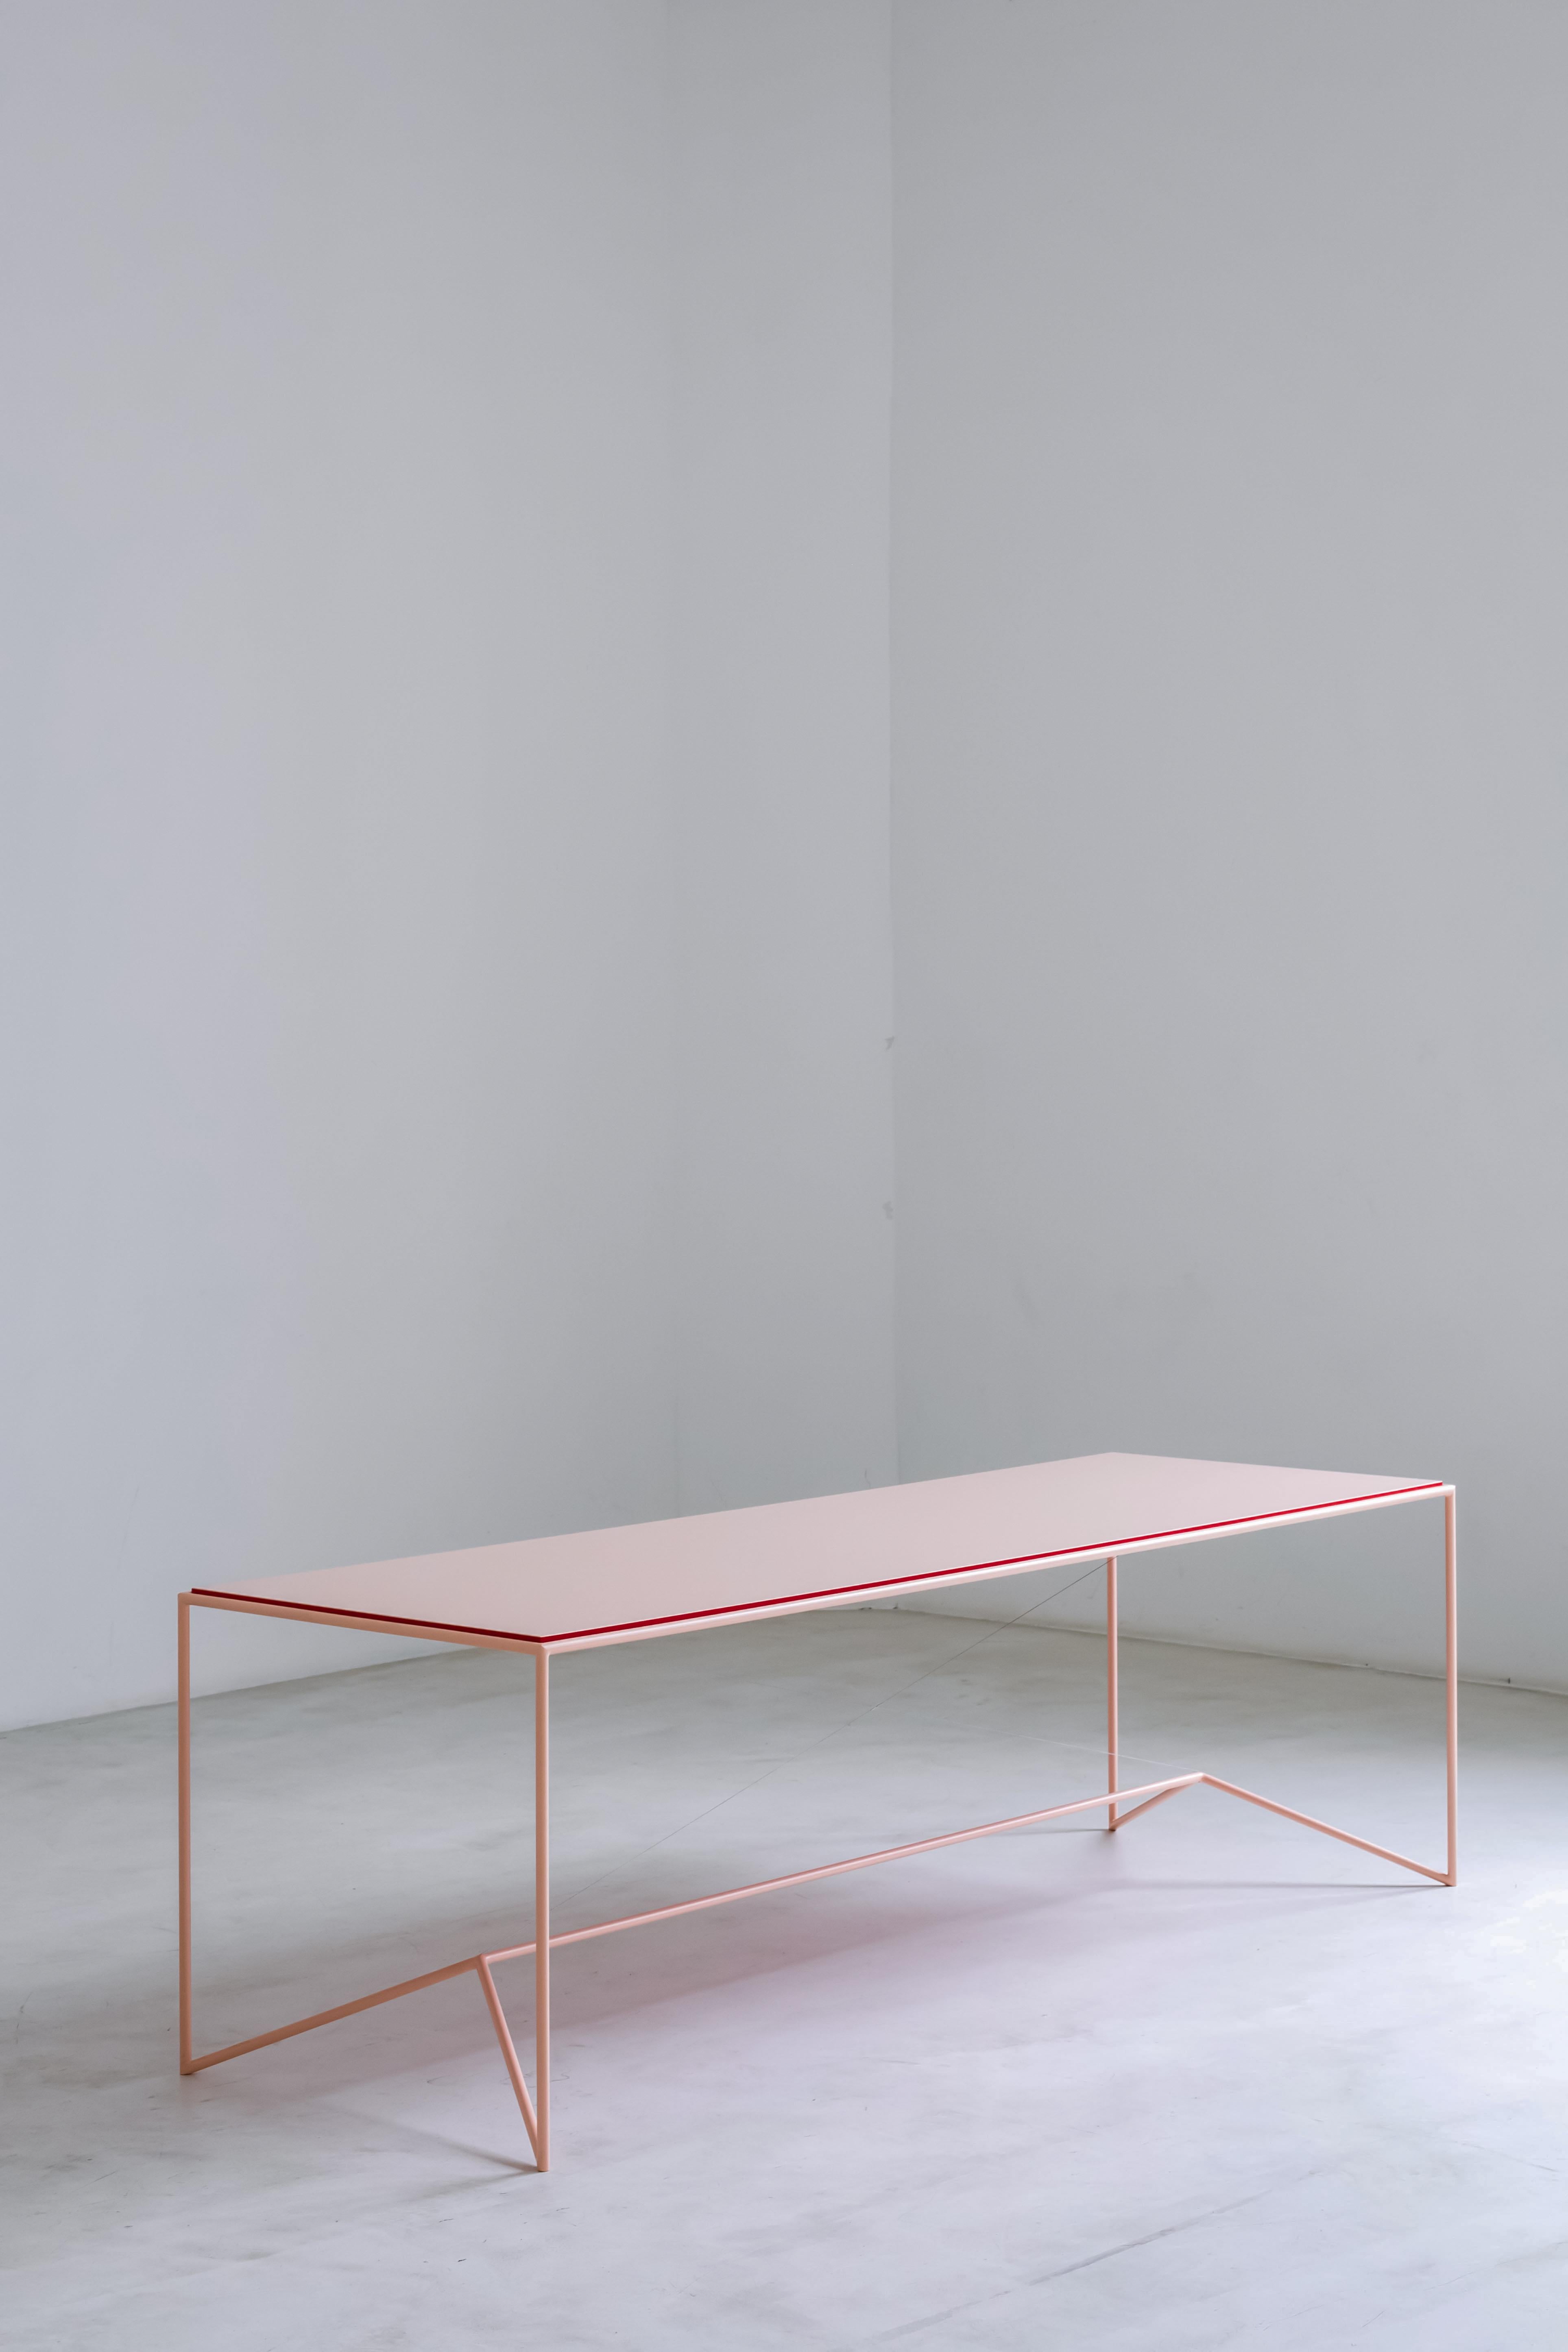 Piece large pink and red table by Maria Scarpulla
Dimensions: D 240 x W 80 x H 75 cm
Materials: Lacquered steel and a lacquered sustainable eco mdf/zf wood.
Also available in different colours, dimensions and combinations. 

It’s the earth of